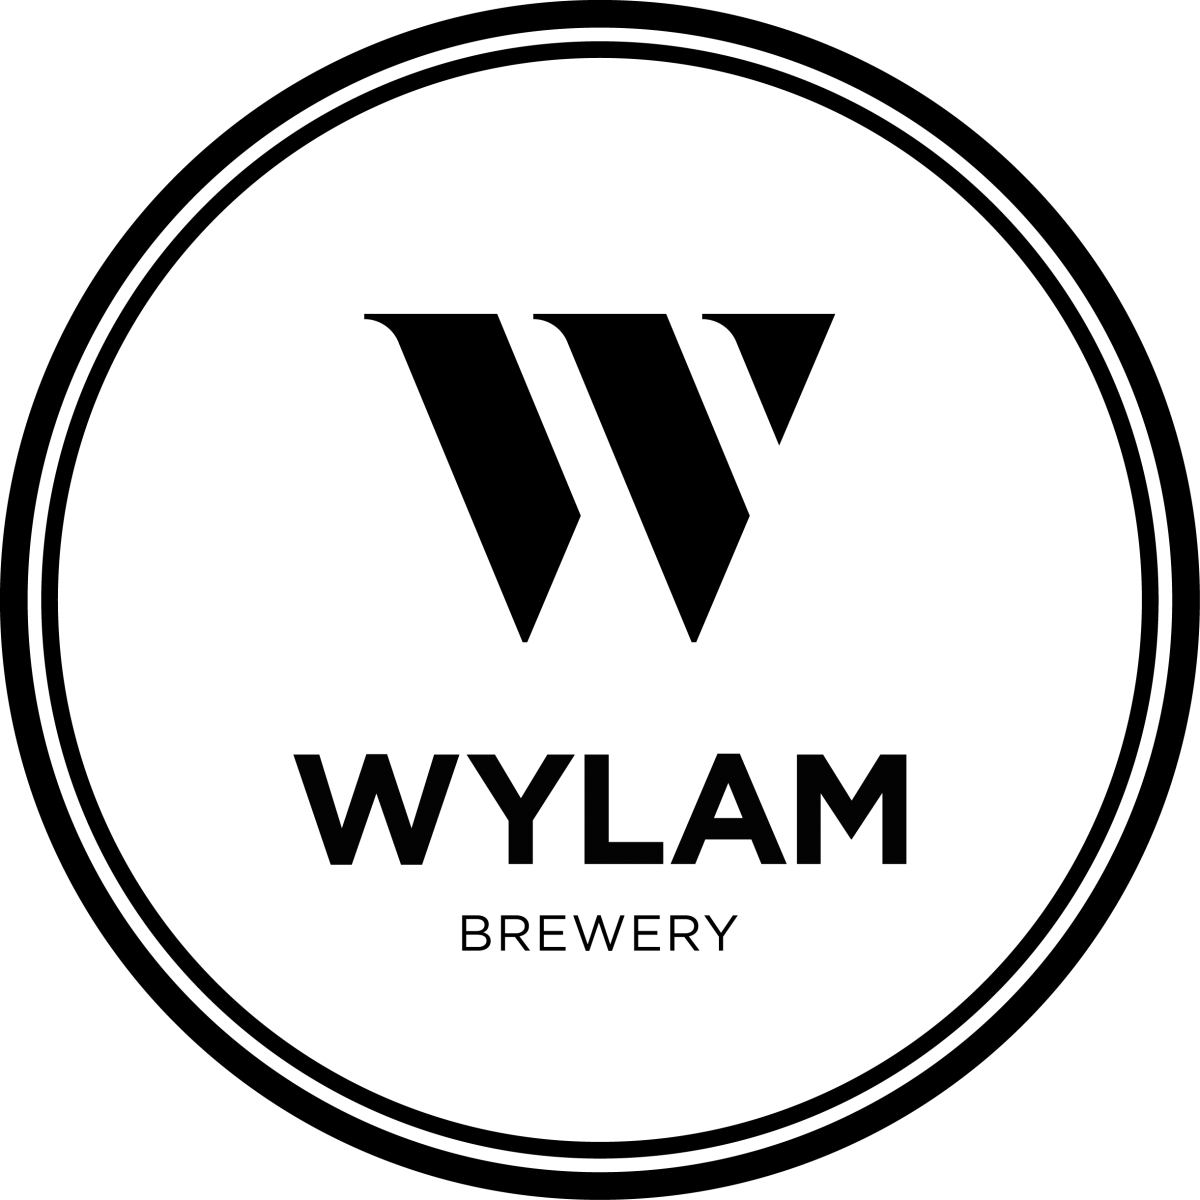 Newcastle Beer Logo - Wylam Brewery • The Palace of Arts, Newcastle upon Tyne